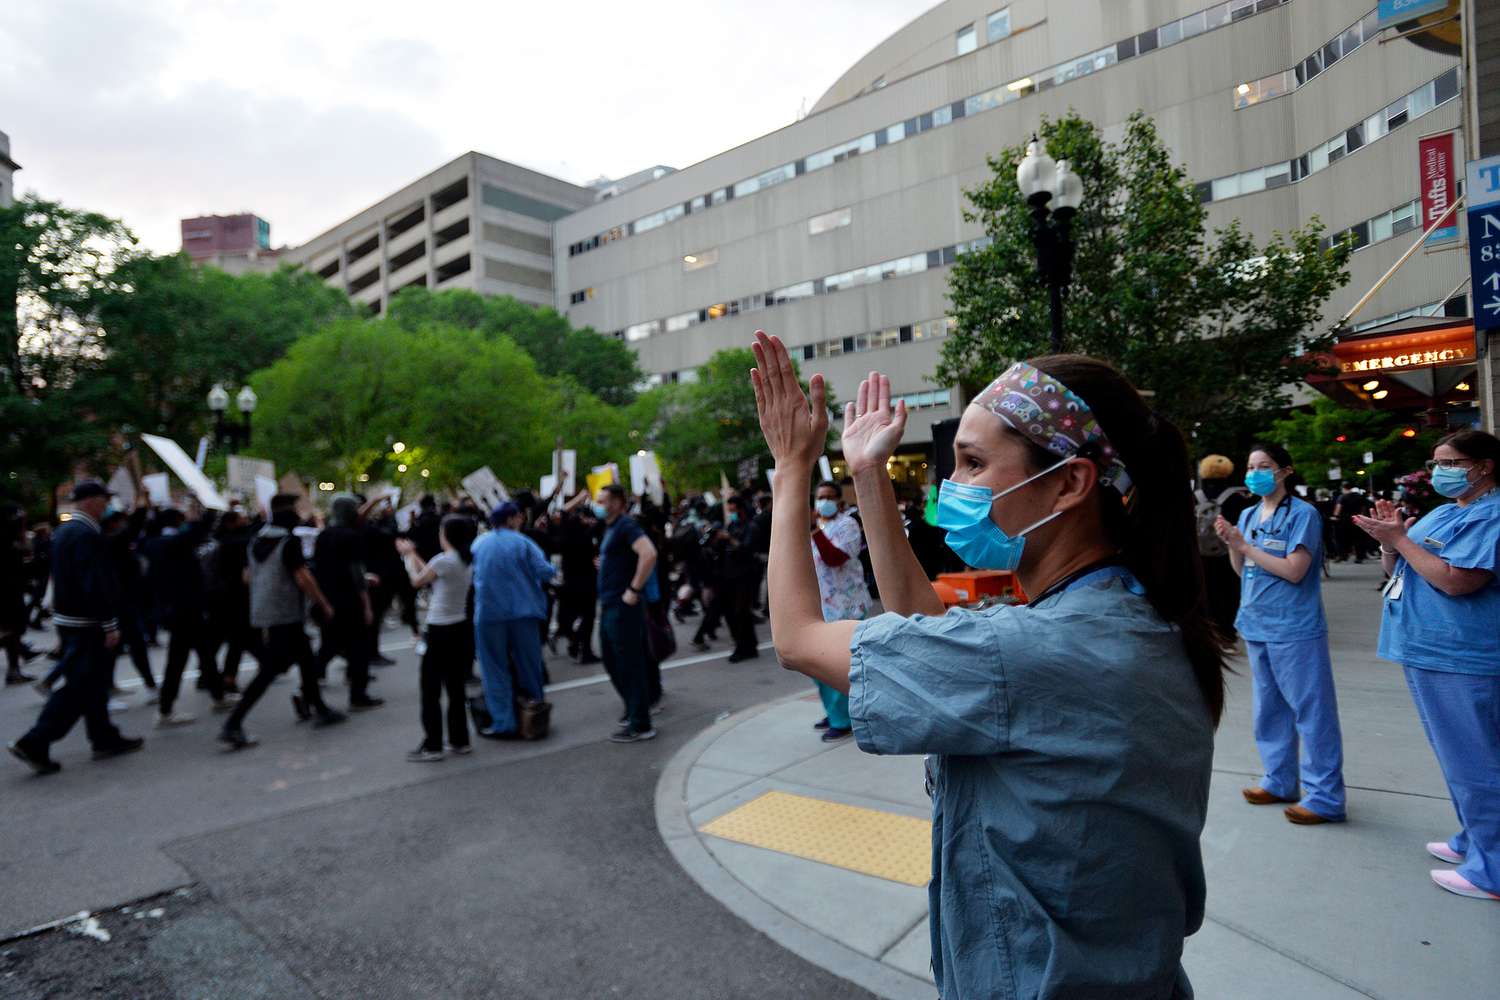 Nurses stand outside a hospital to applaud protesters marching during a demonstration over the death of George Floyd